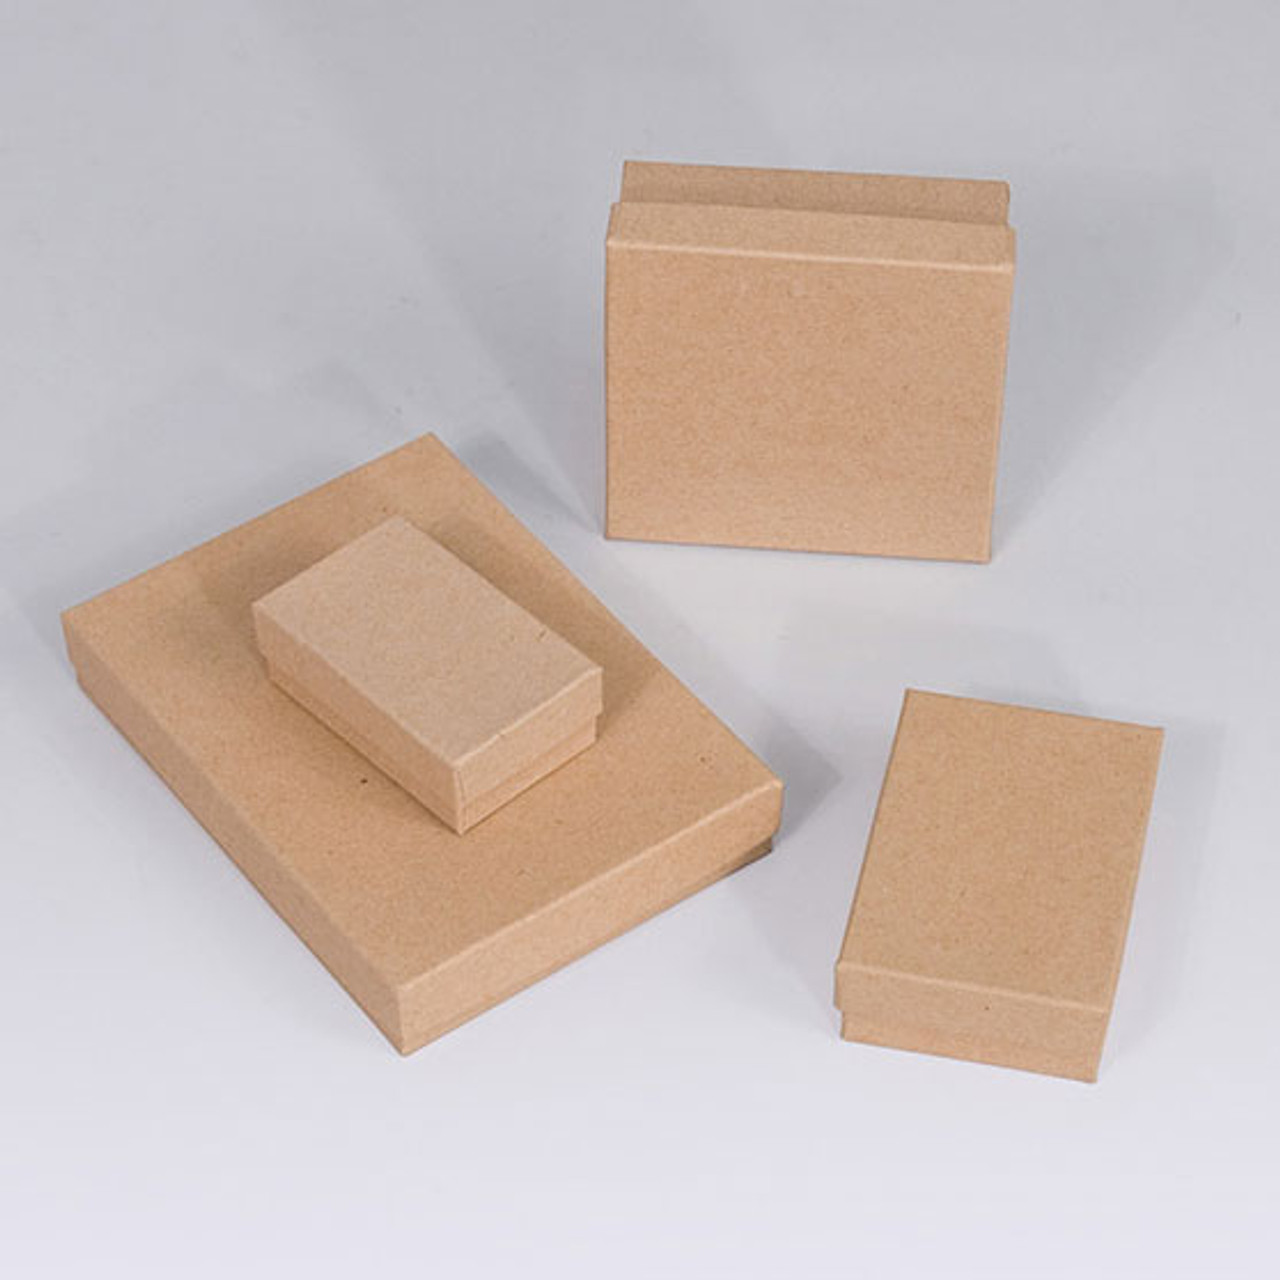 100 Small Kraft Cotton Fill Jewelry Packaging Gift Boxes 2 1/8 x 1 1/2 x  5/8 on eBid United States